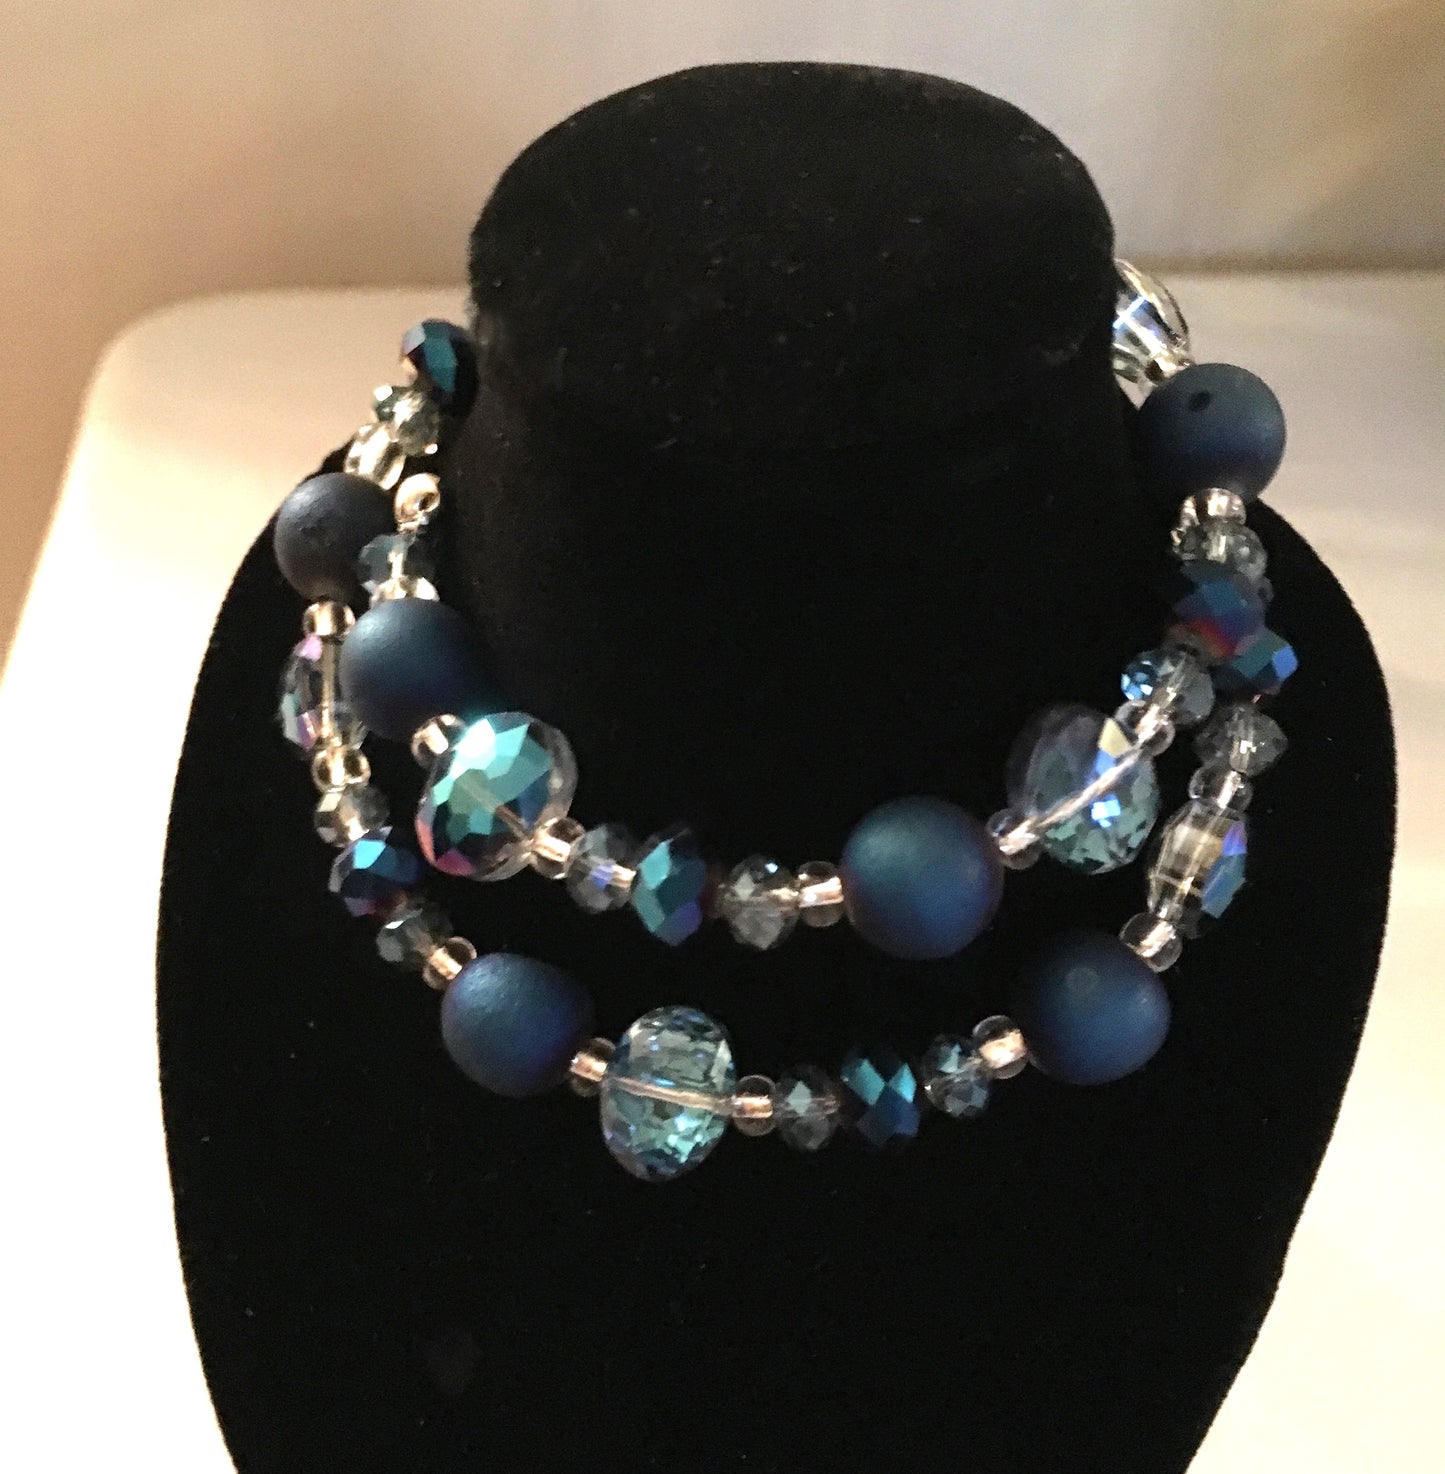 Blue druzy and faceted beaded memory wire bracelet